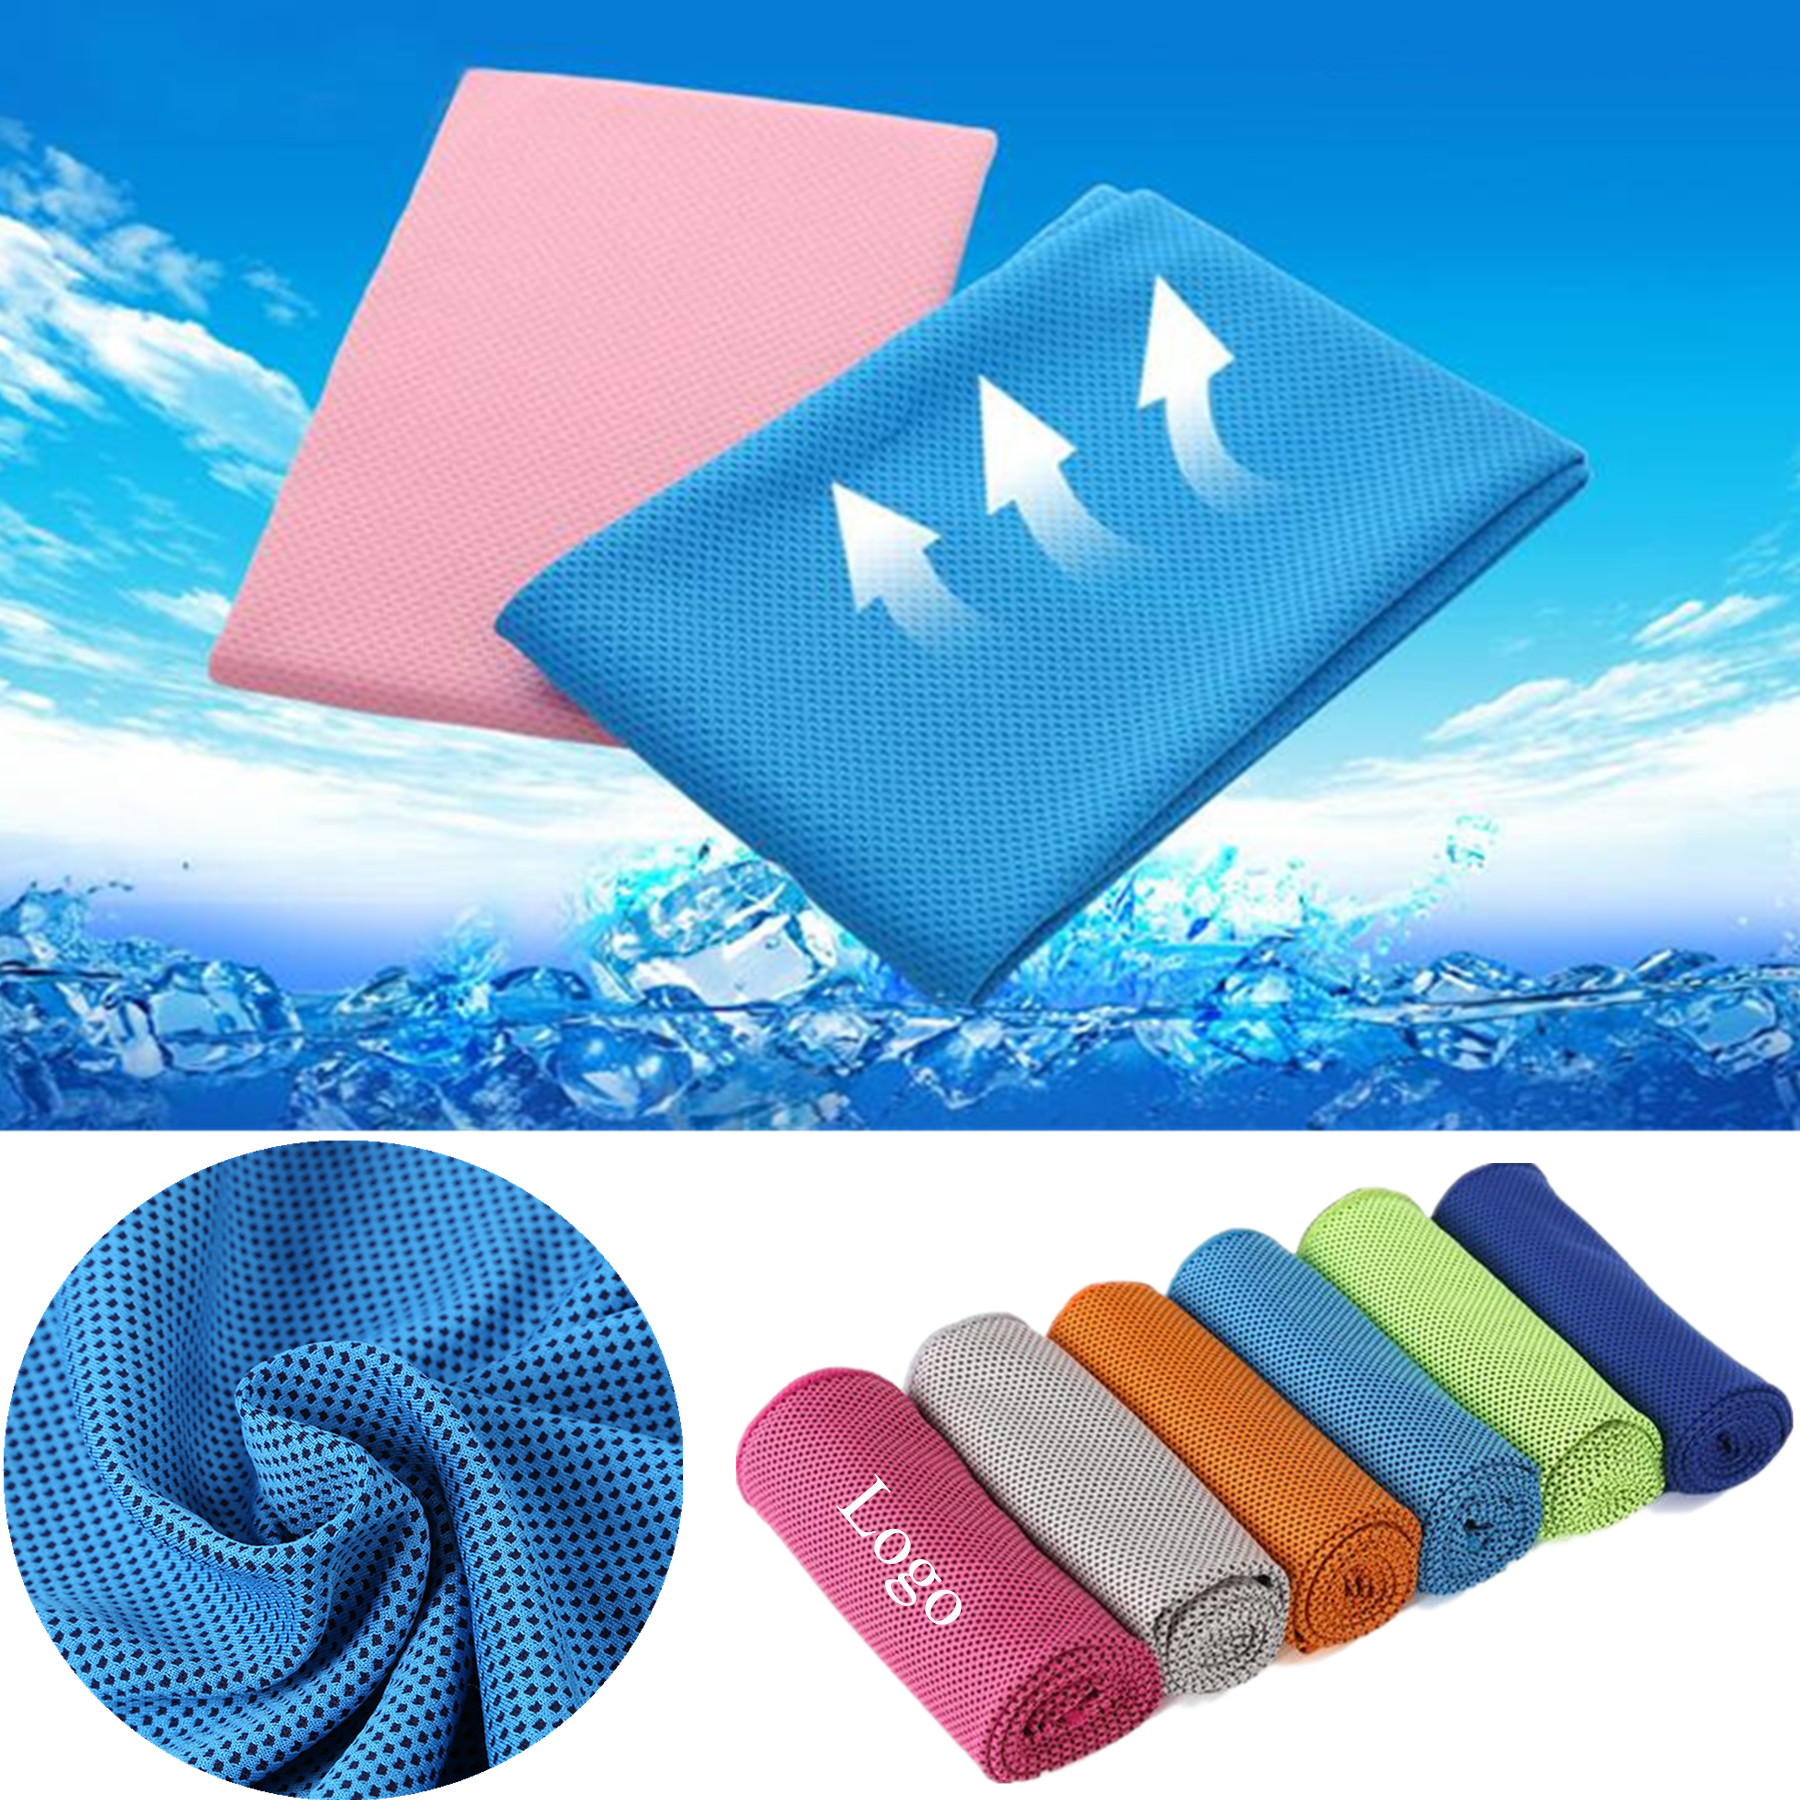   Cooling Towel Chilly Pad Ice Scarf Bandana 